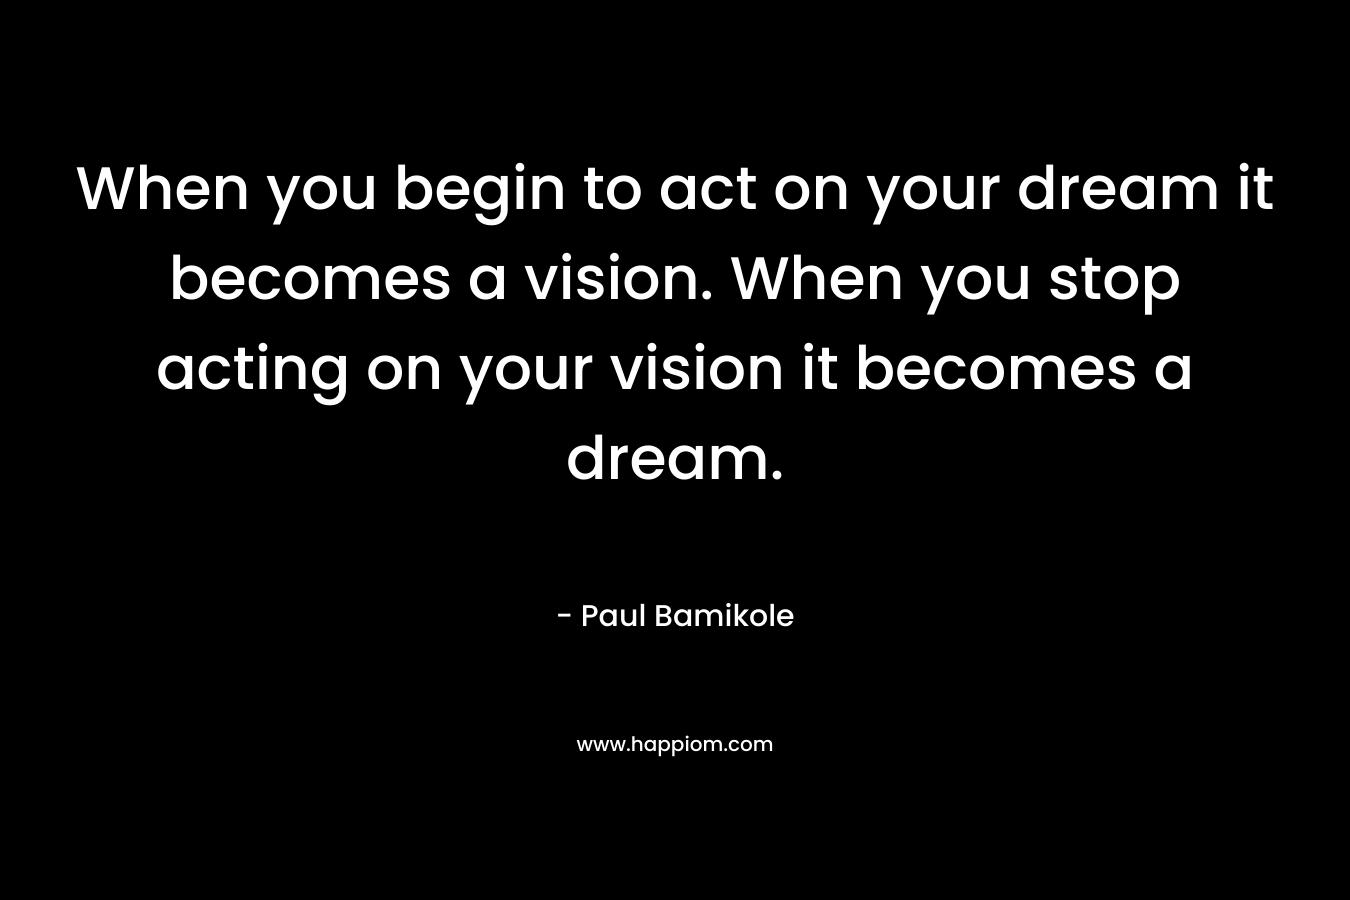 When you begin to act on your dream it becomes a vision. When you stop acting on your vision it becomes a dream.